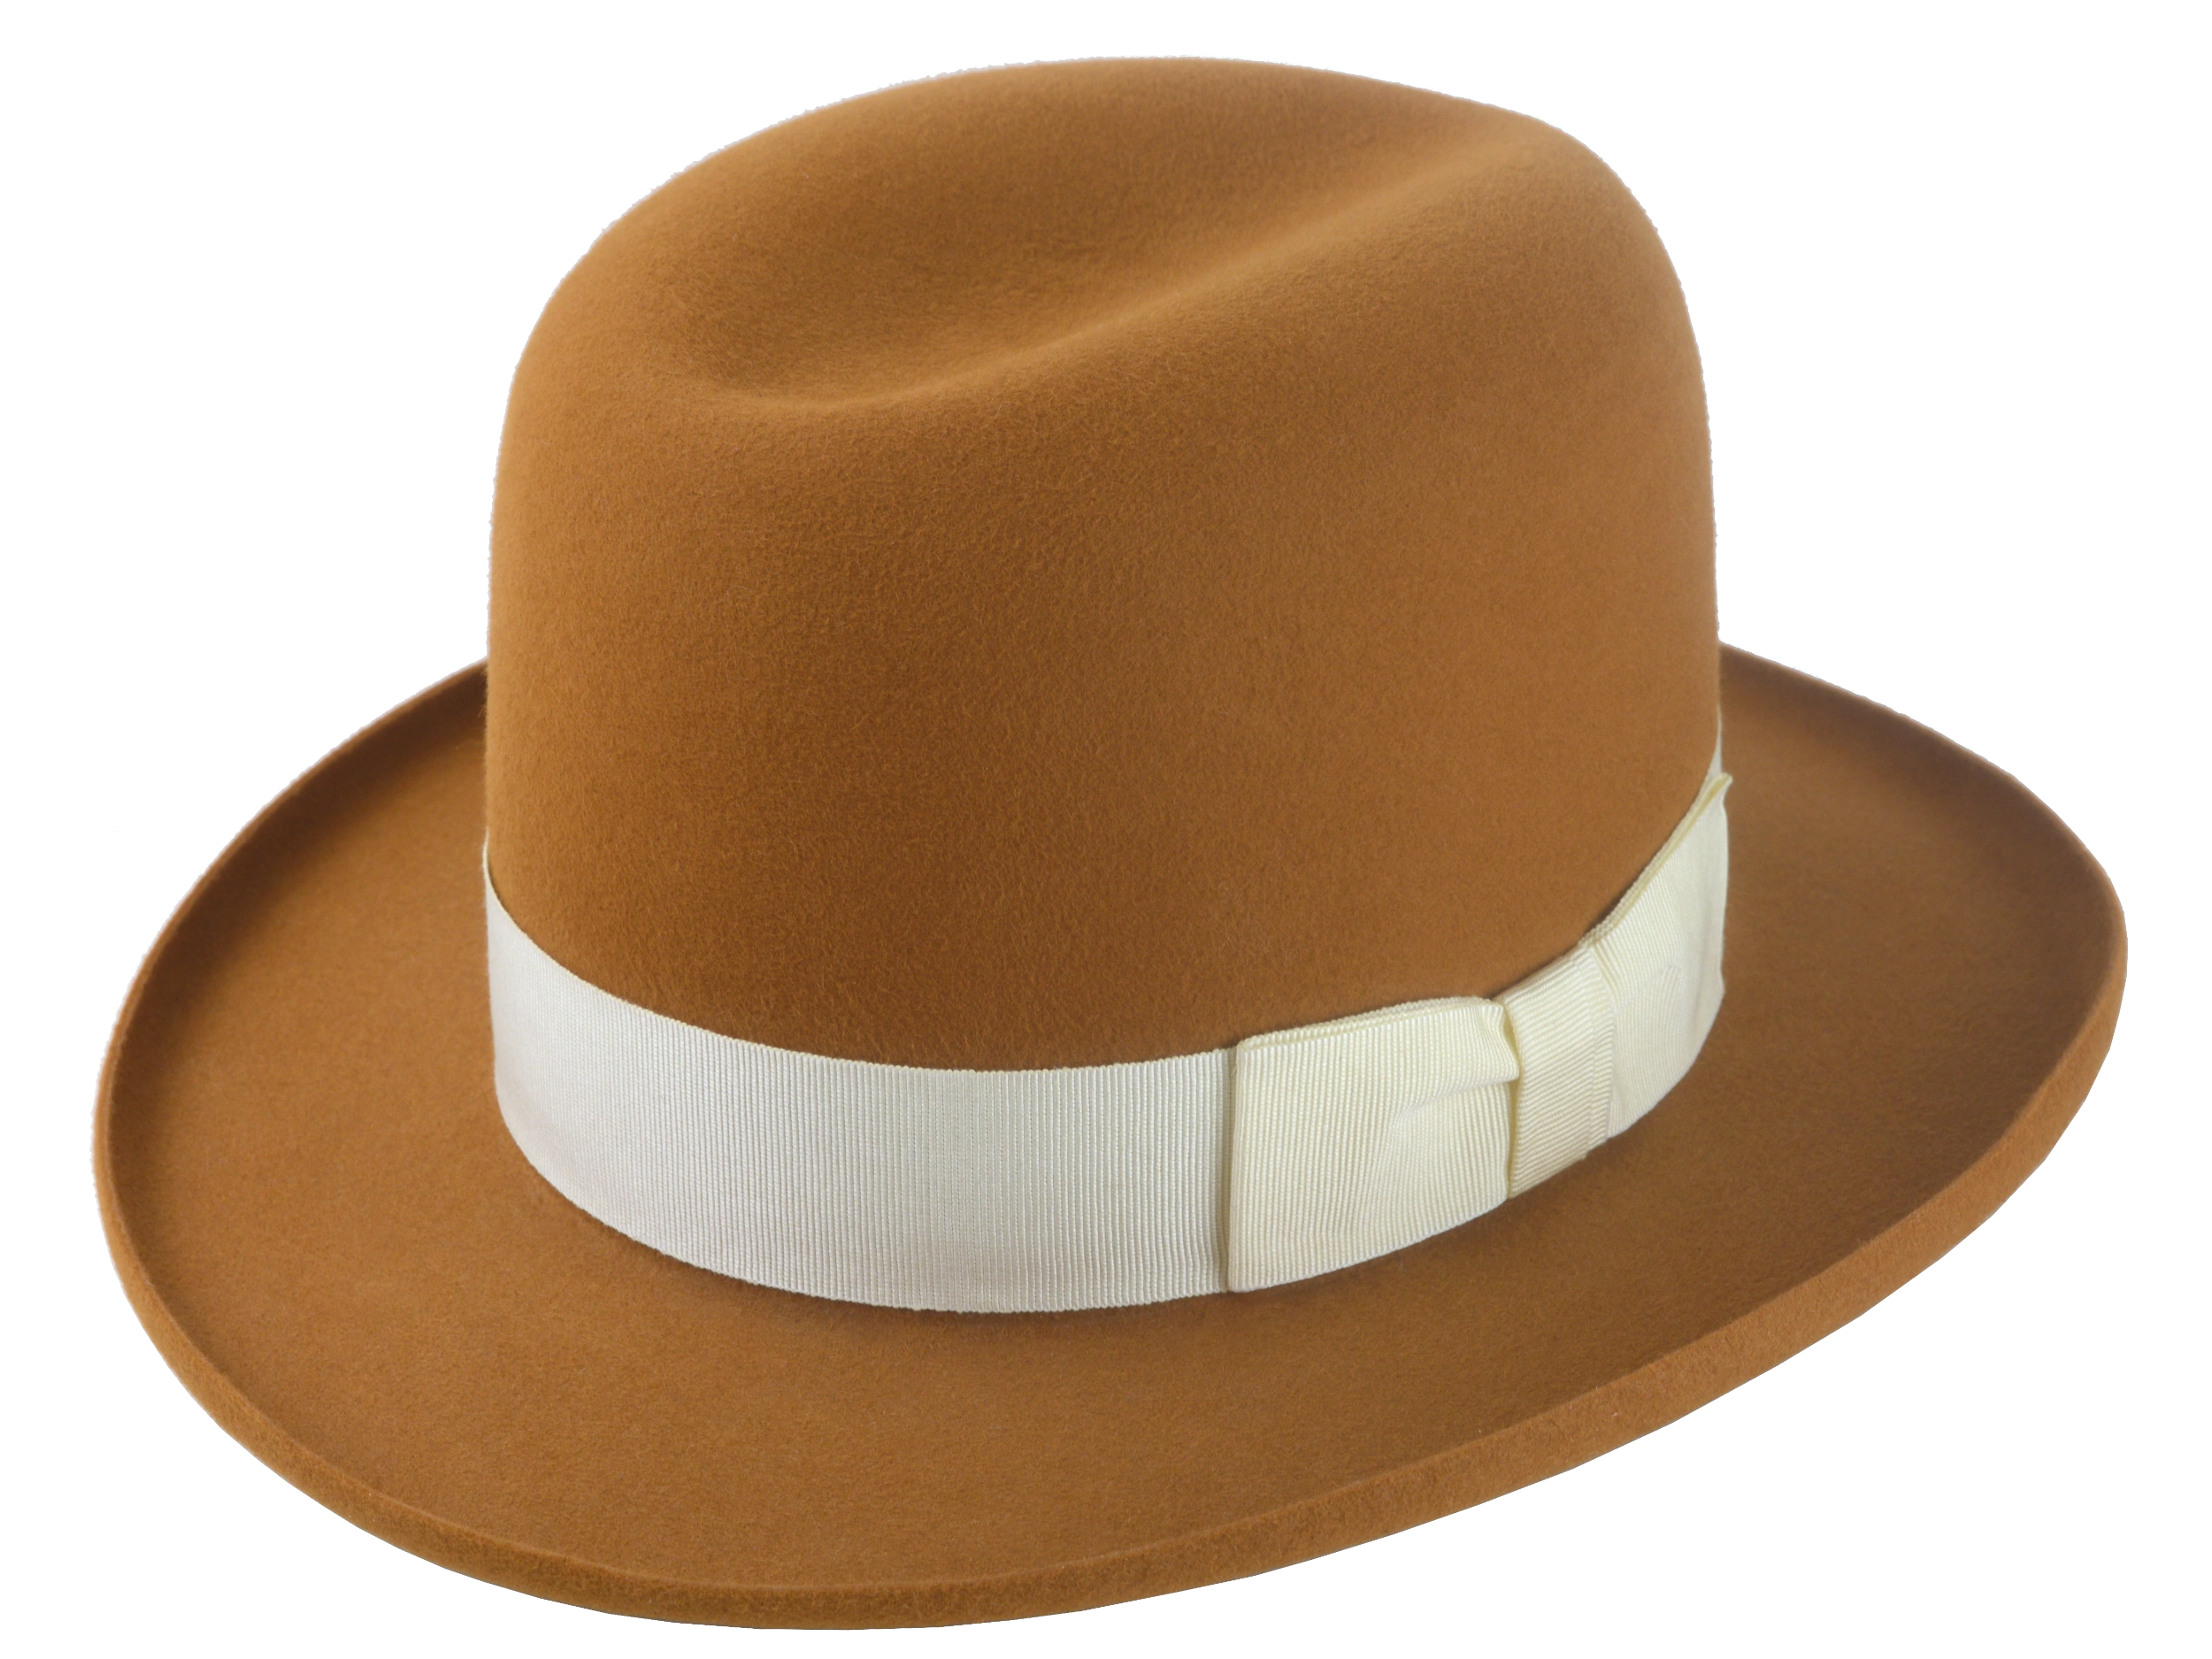 Premium Fedora with Single-Crease Crown and Raw-Edge Rolled Brim